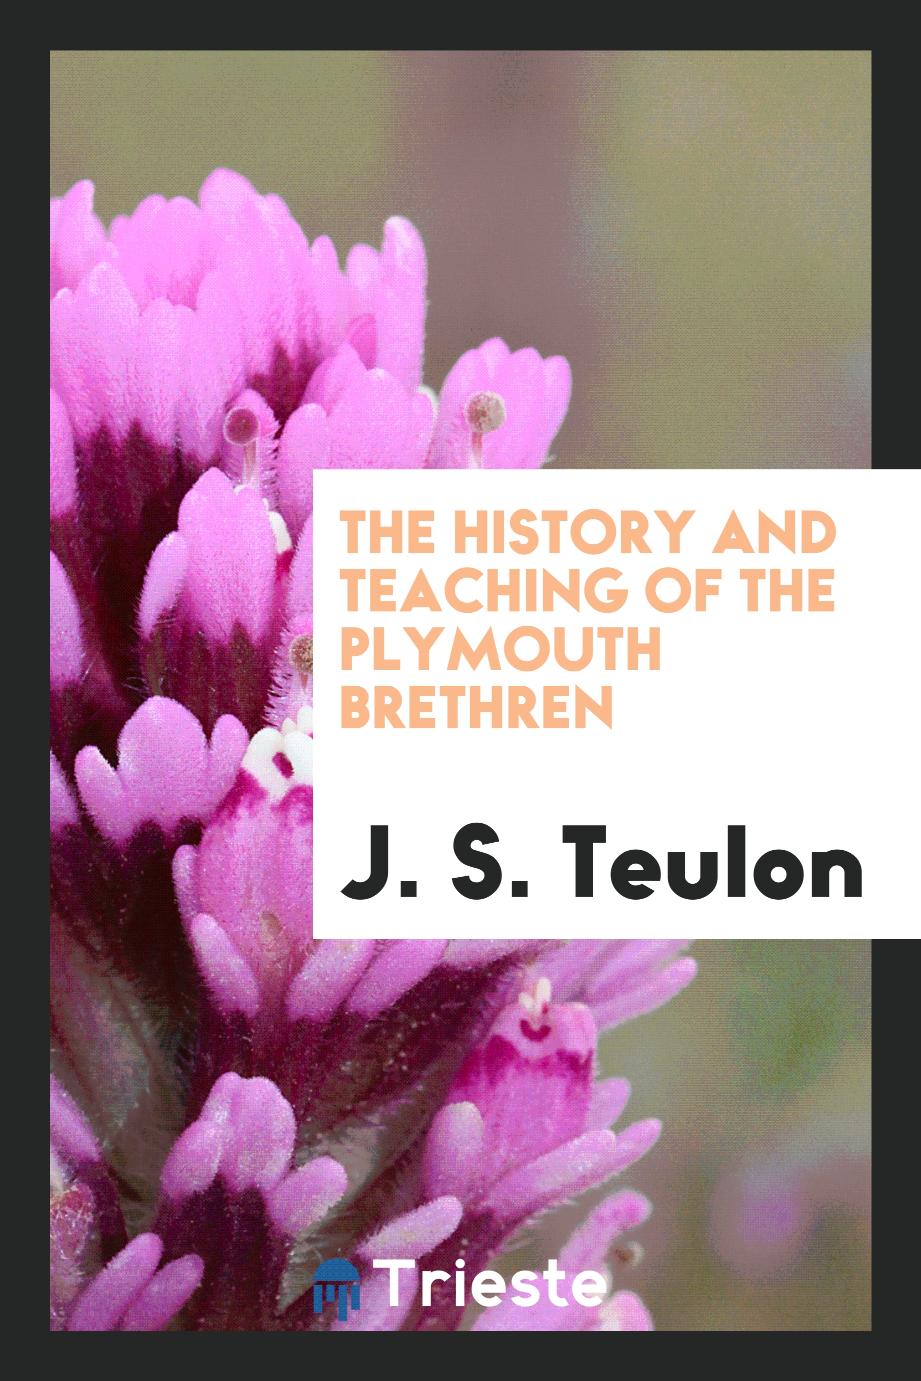 The history and teaching of the Plymouth Brethren